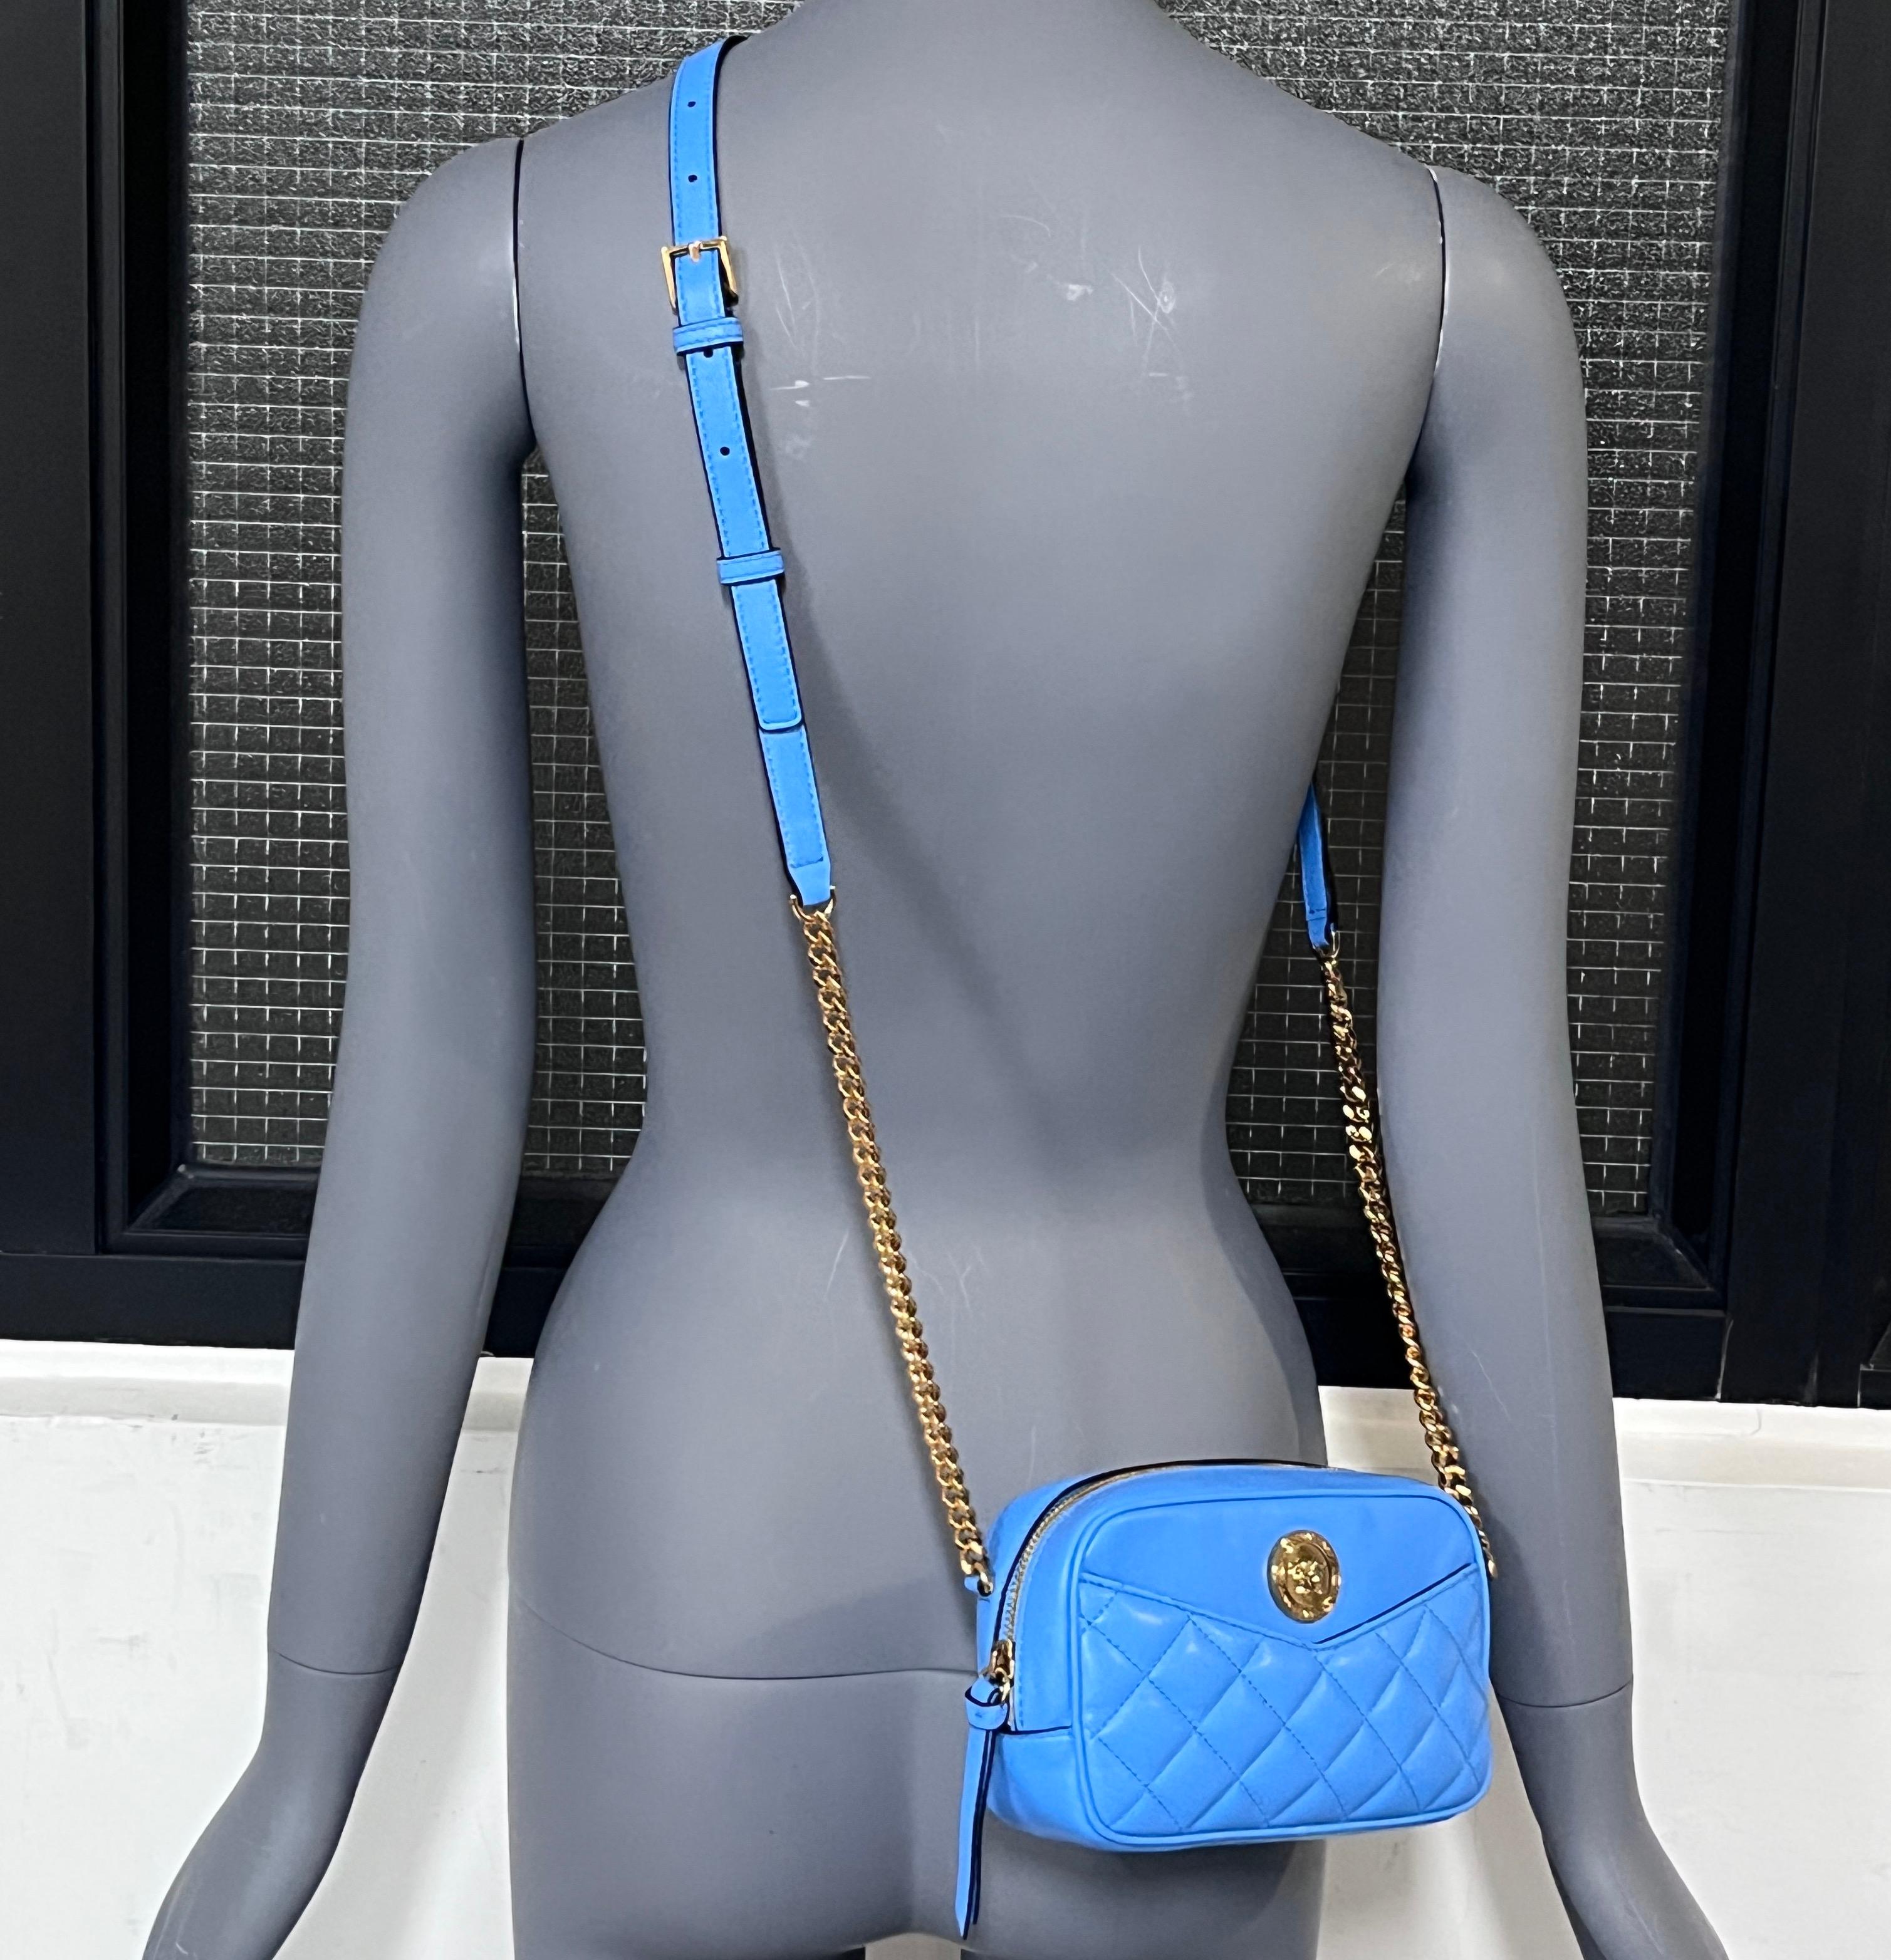 new VERSACE blue lambskin leather quilted gold Medusa chain crossbody bag Small
Reference: TGAS/D00825
Brand: Versace
Designer: Donatella Versace
Model: 1008827 1A03912 !V57V
Collection: Tribute
Material: Lambskin Leather, Metal
Color: Blue,